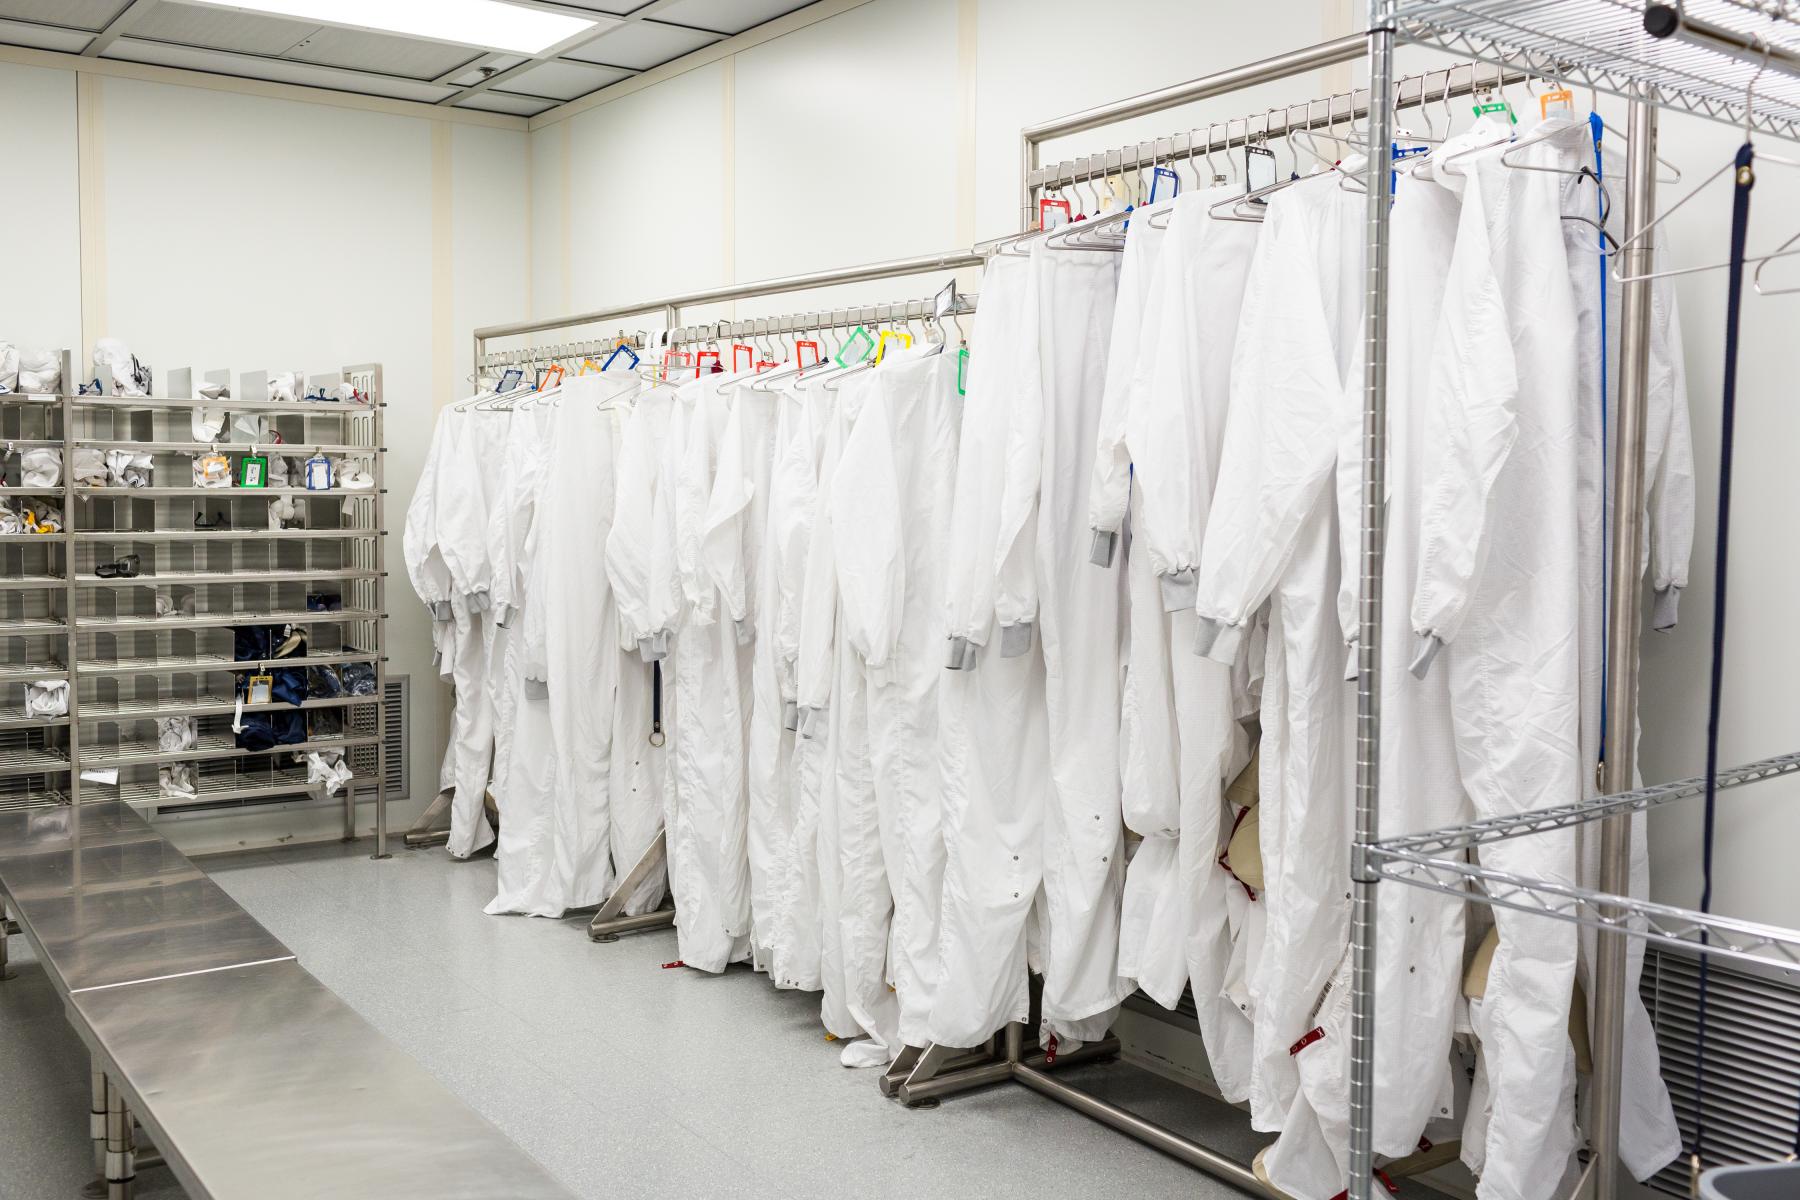 Photograph of cleanroom suits on a rack used in a nanotechnology fabrication lab.